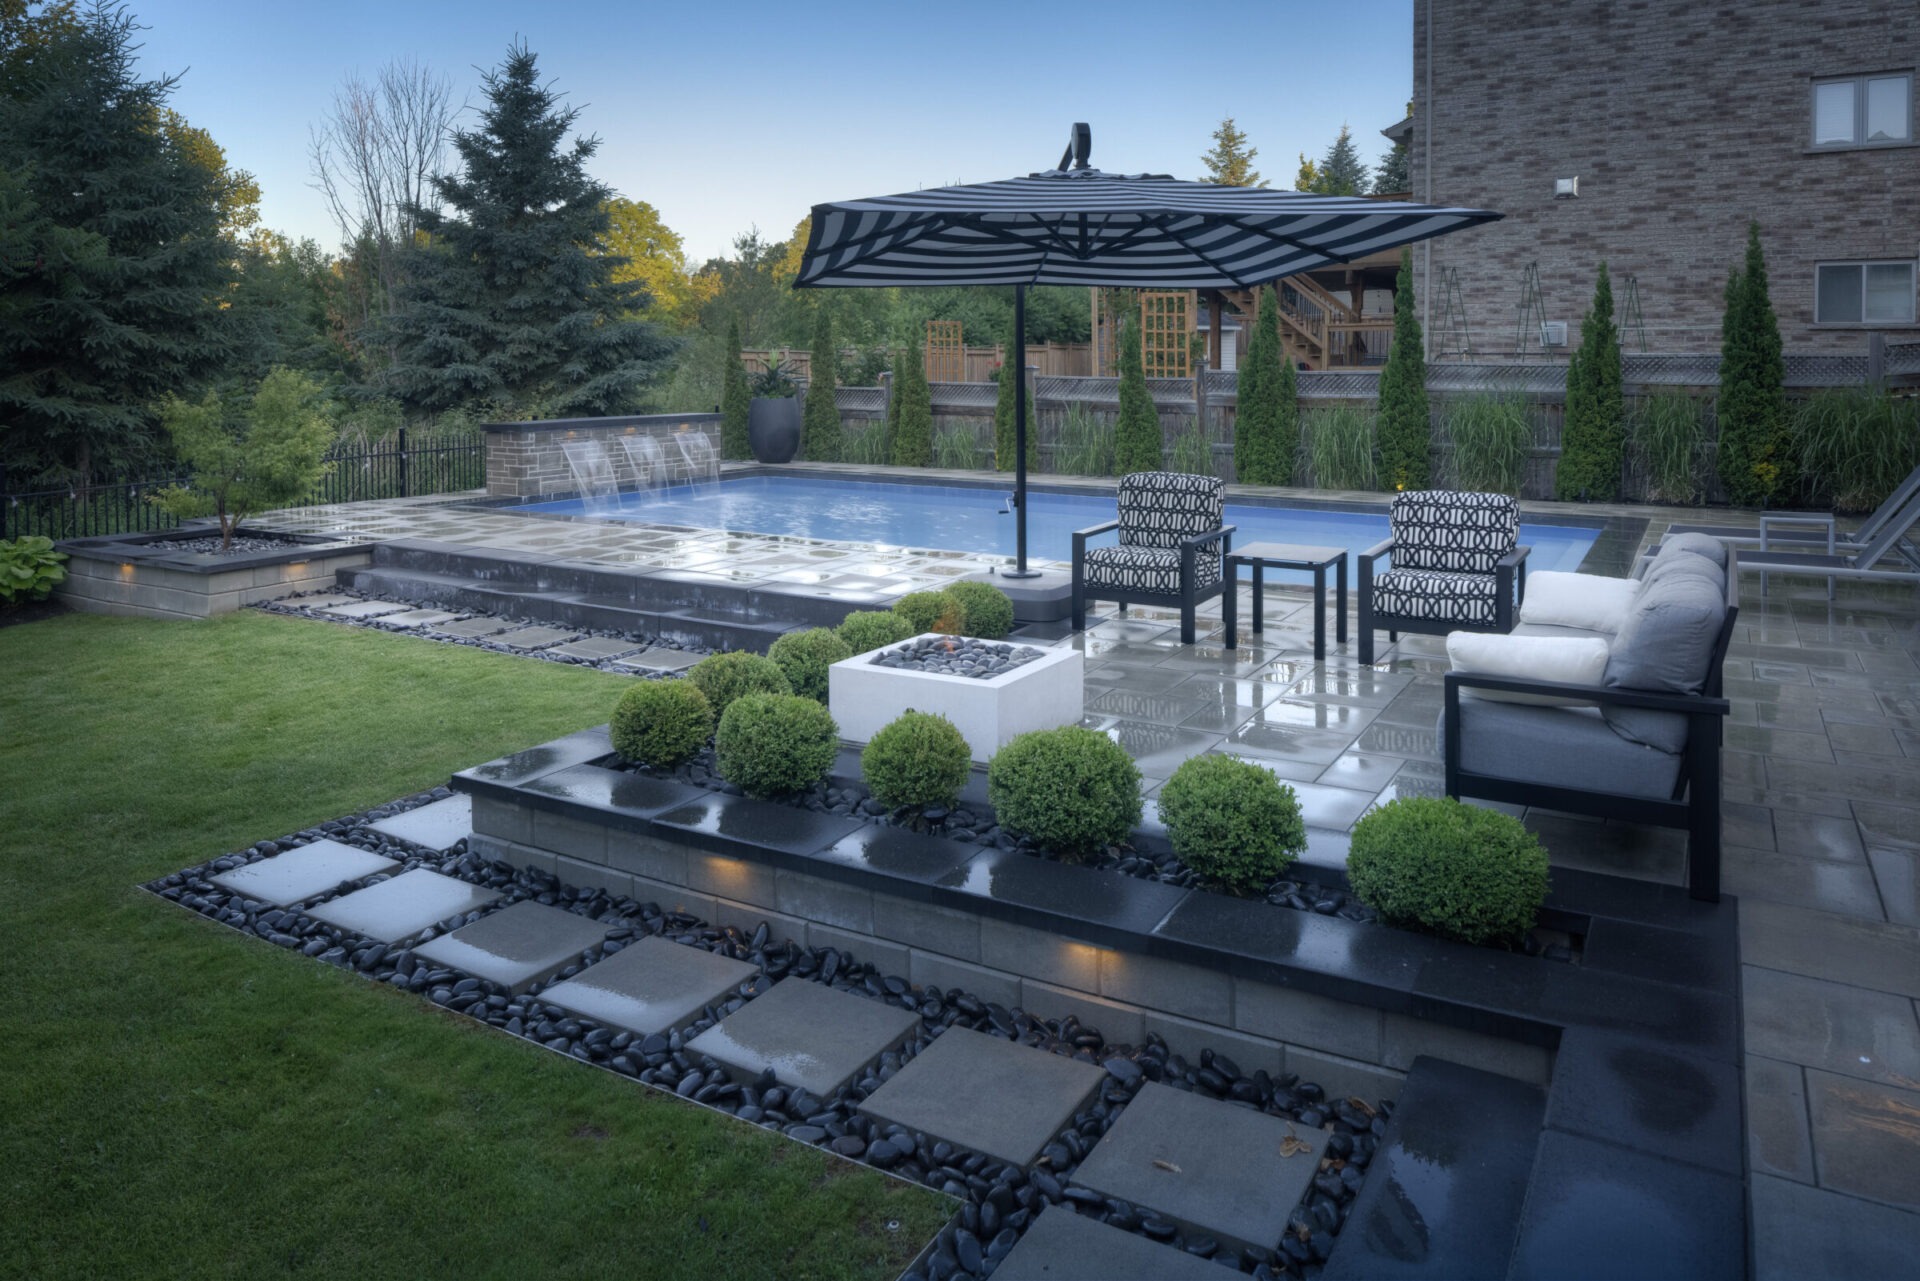 An elegant outdoor space featuring a swimming pool, stylish furniture under a parasol, patterned tile flooring, manicured bushes, and a backdrop of trees.